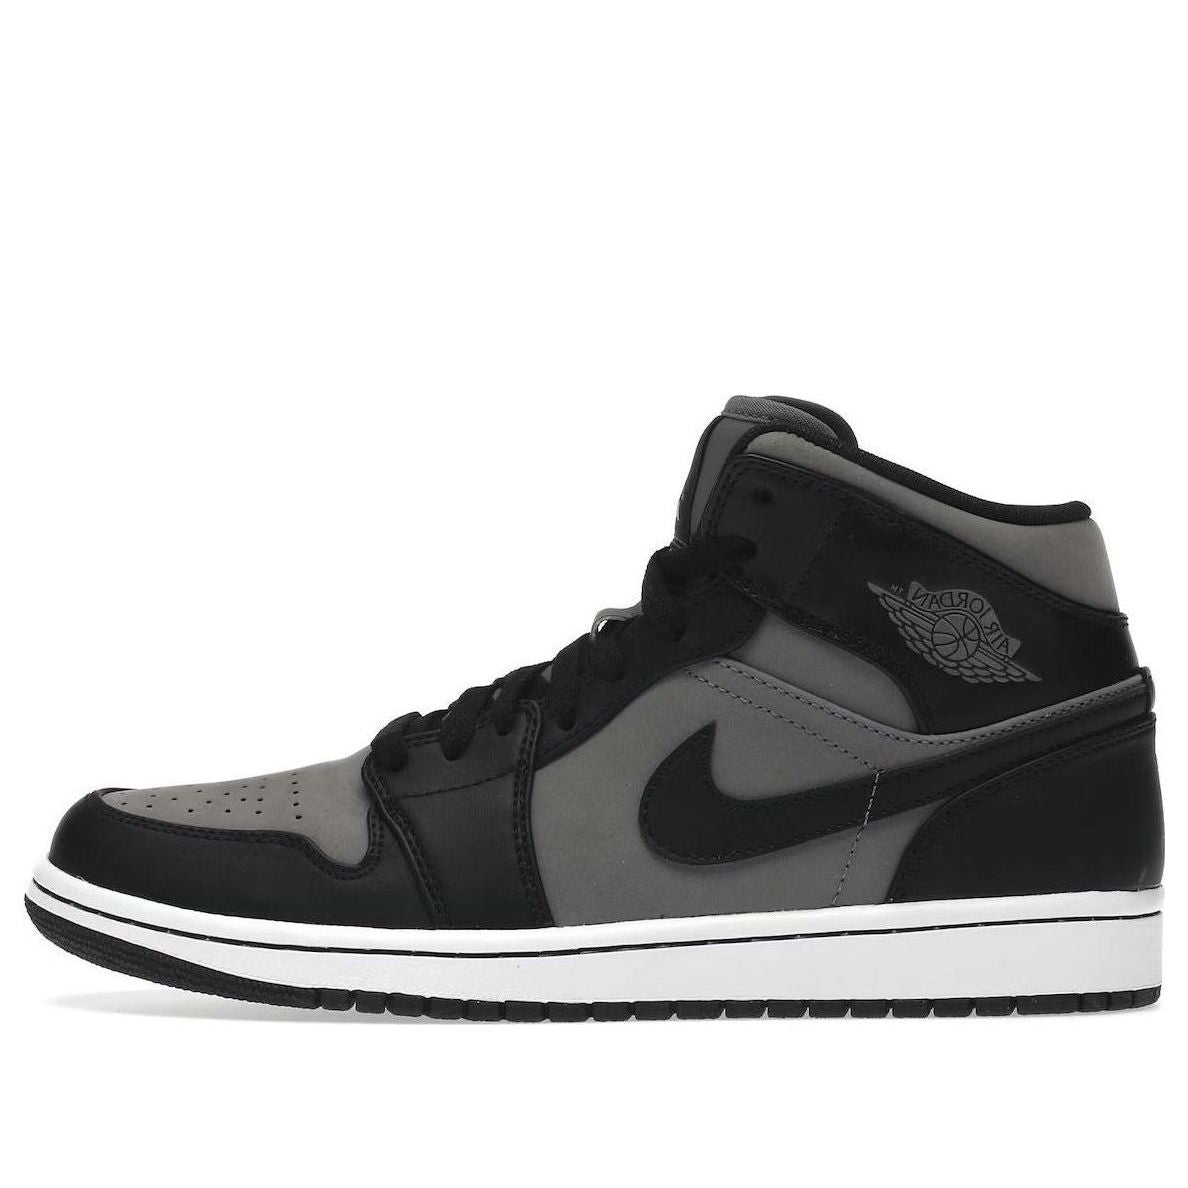 Air Jordan 1 Mid 'Cool Grey'  364770-023 Iconic Trainers